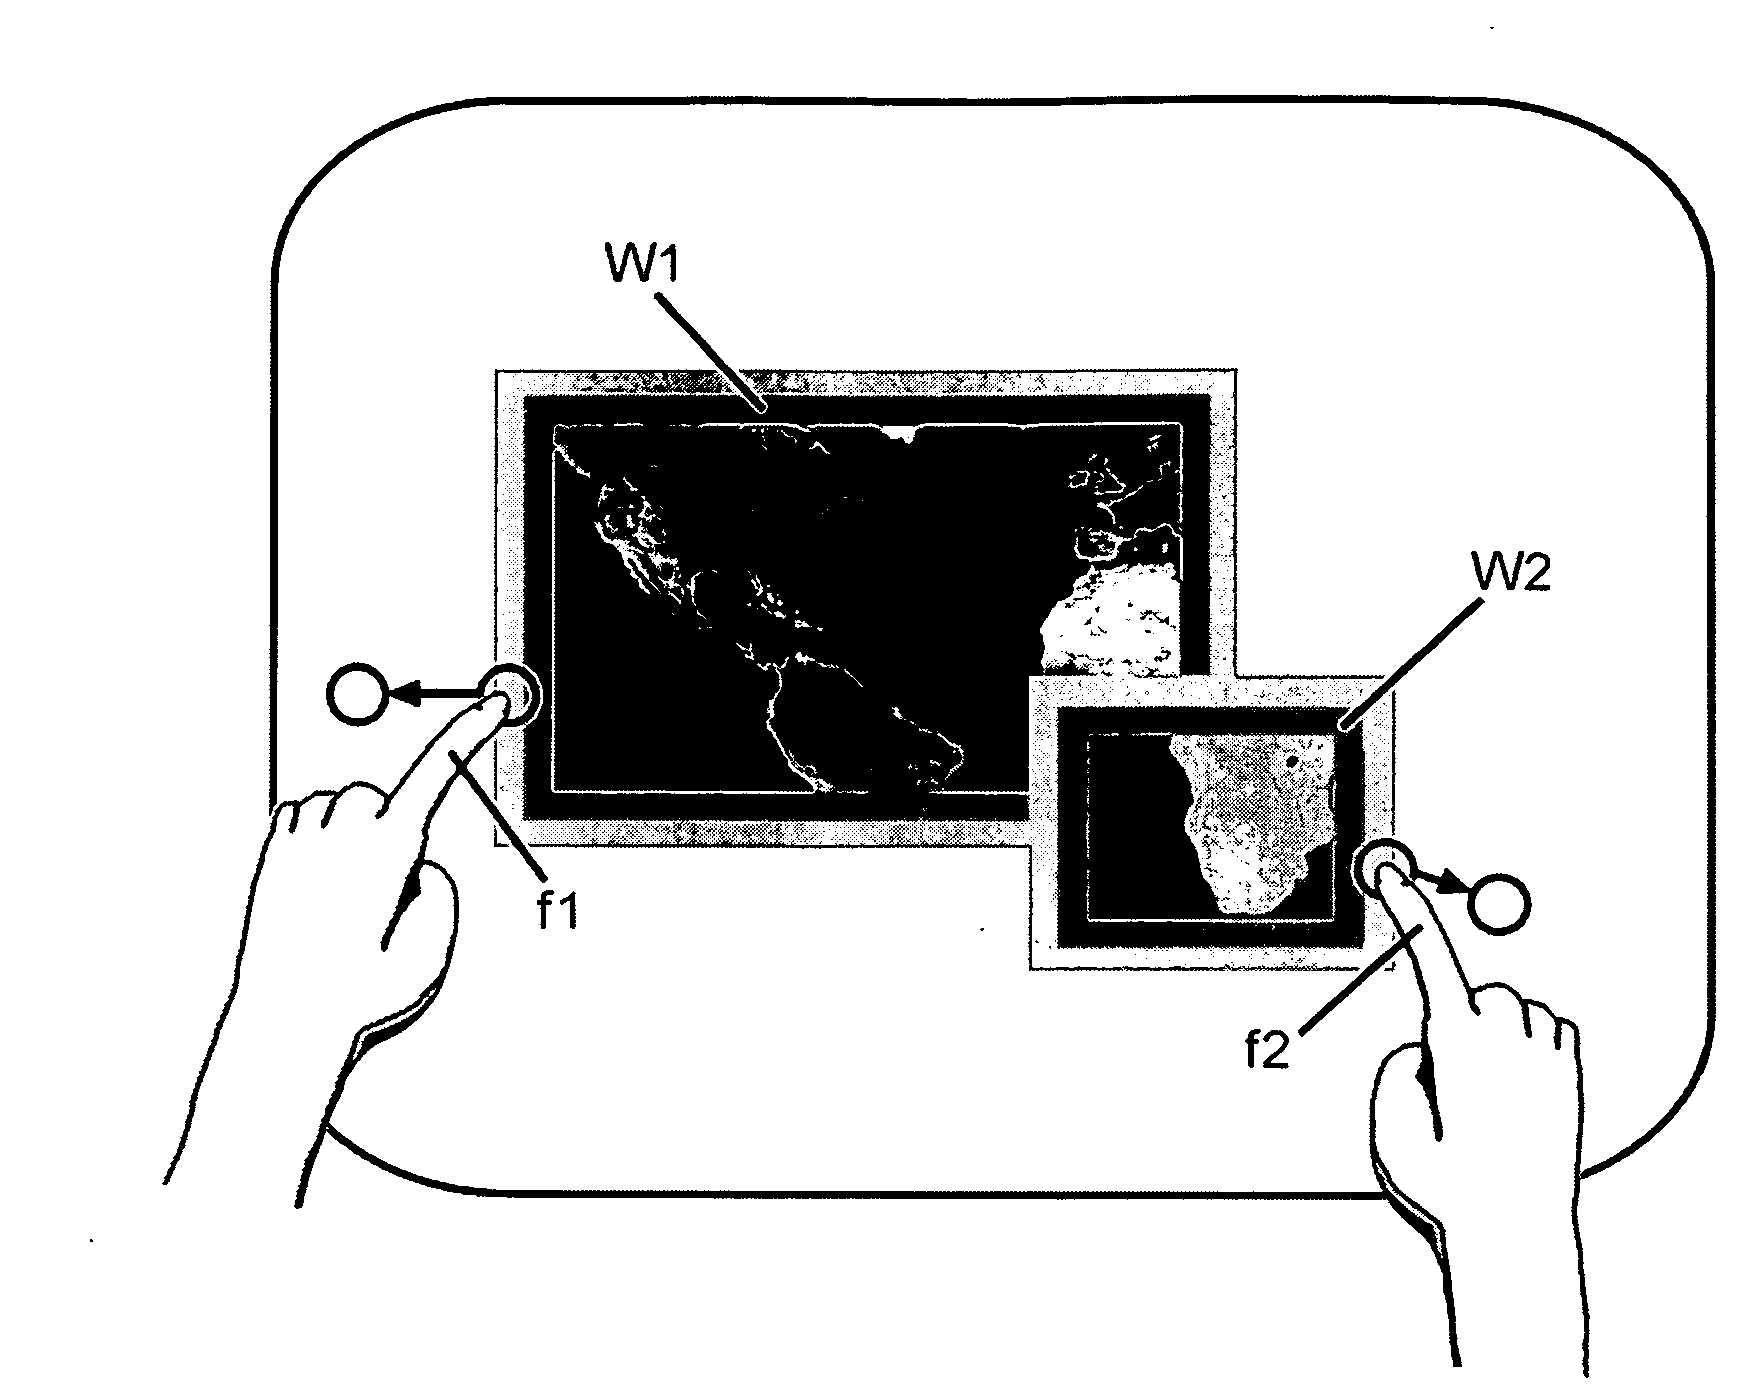 Methods of interfacing with multi-input devices and multi-input display systems employing interfacing techniques